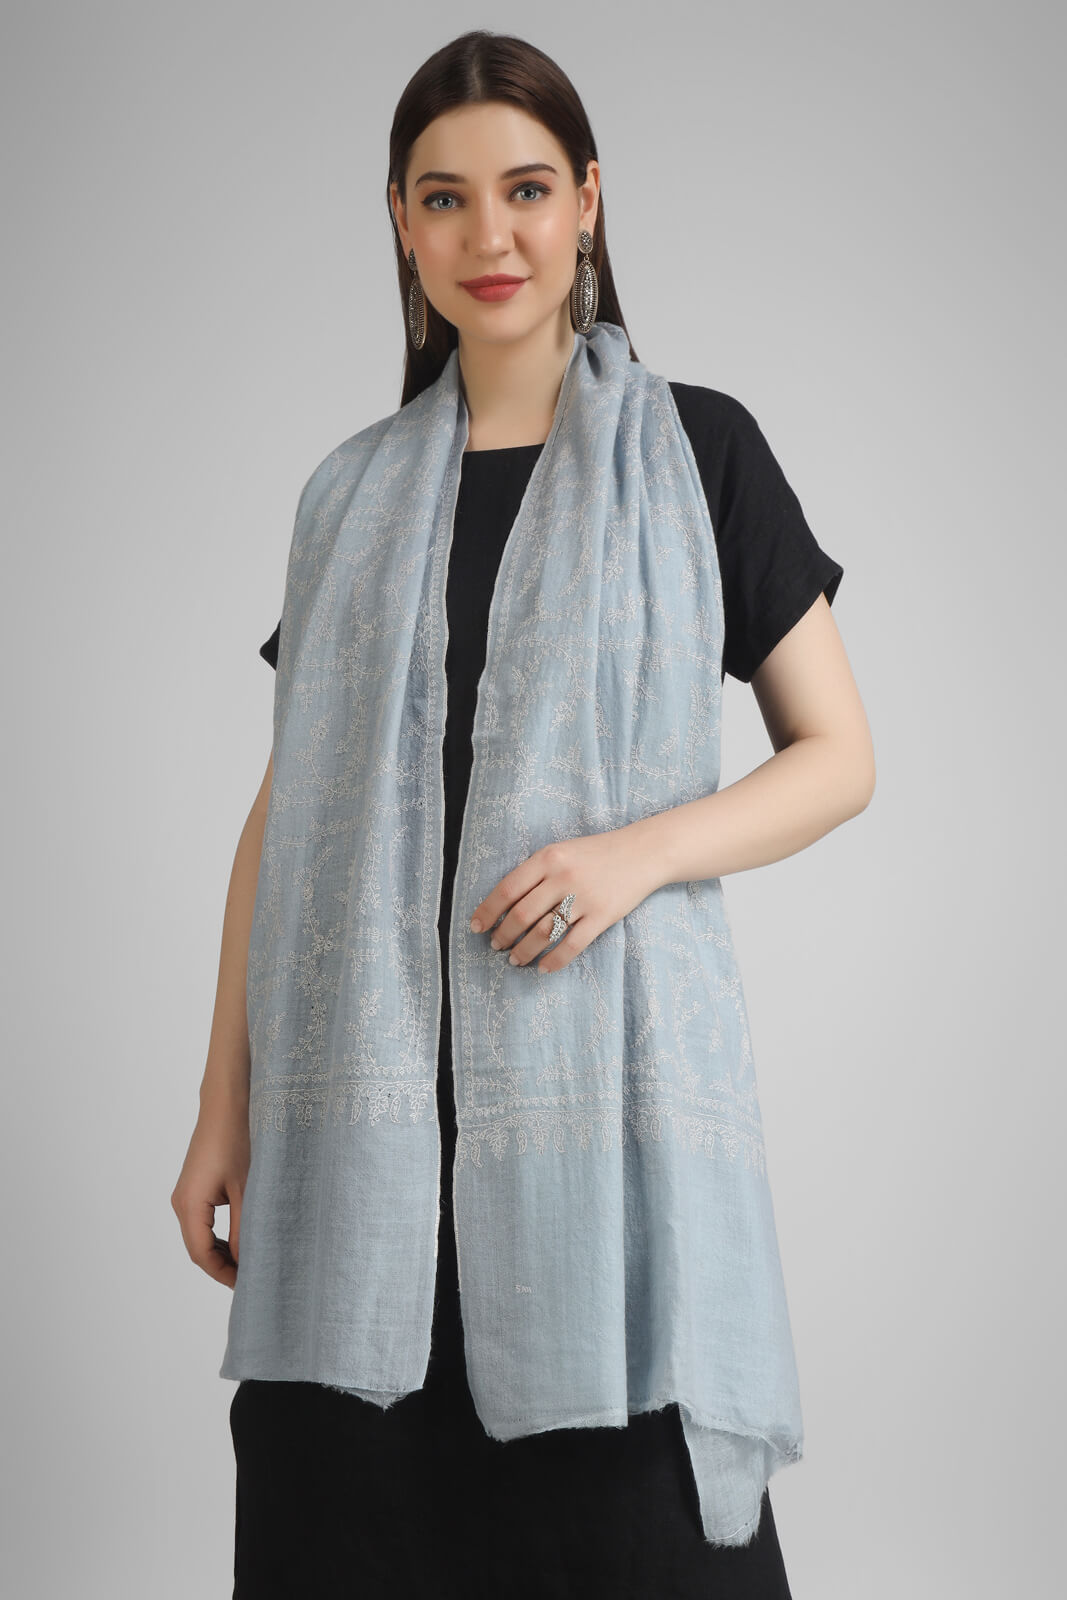 PASHMINA EMBROIDERY STOLE Gray Jazba Jaldaar White Embroidery Sozni Stole- We deliver our premium Pashmina products to the United Kingdom, Germany, France, Japan, UAE, and Australia.